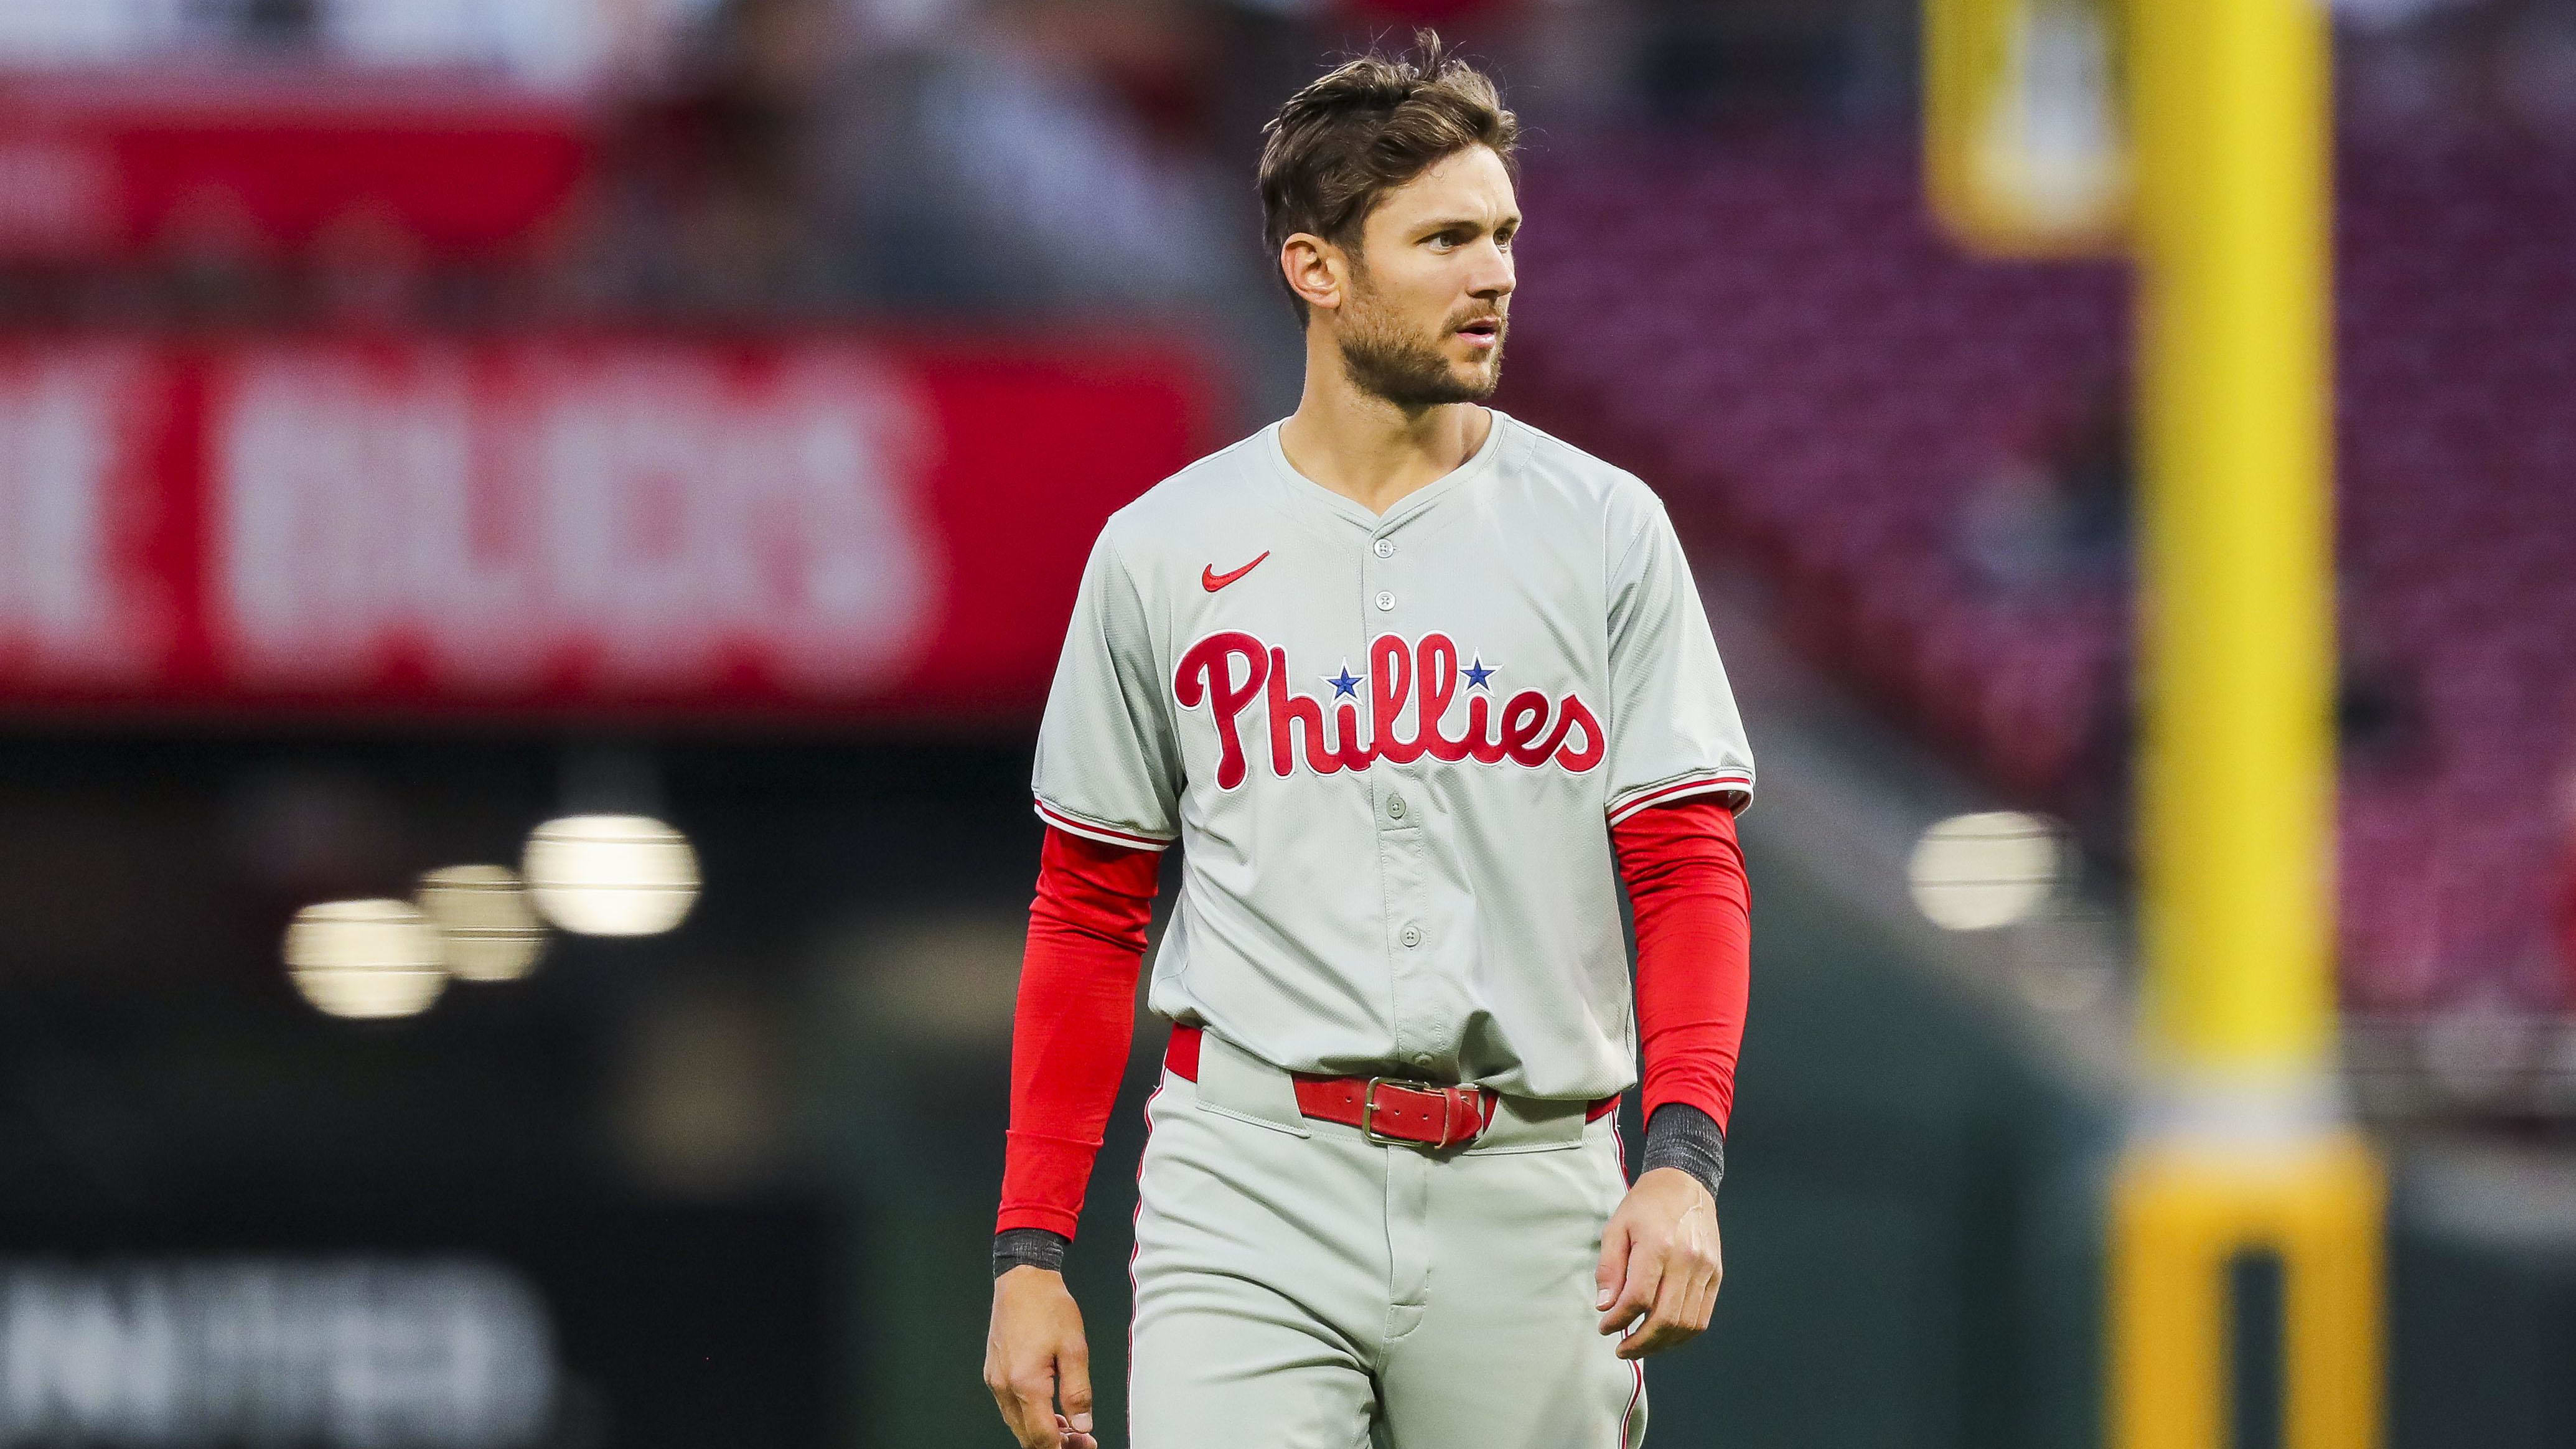 Phillies’ Trea Turner Expects to Be Out Six Weeks With Hamstring Strain